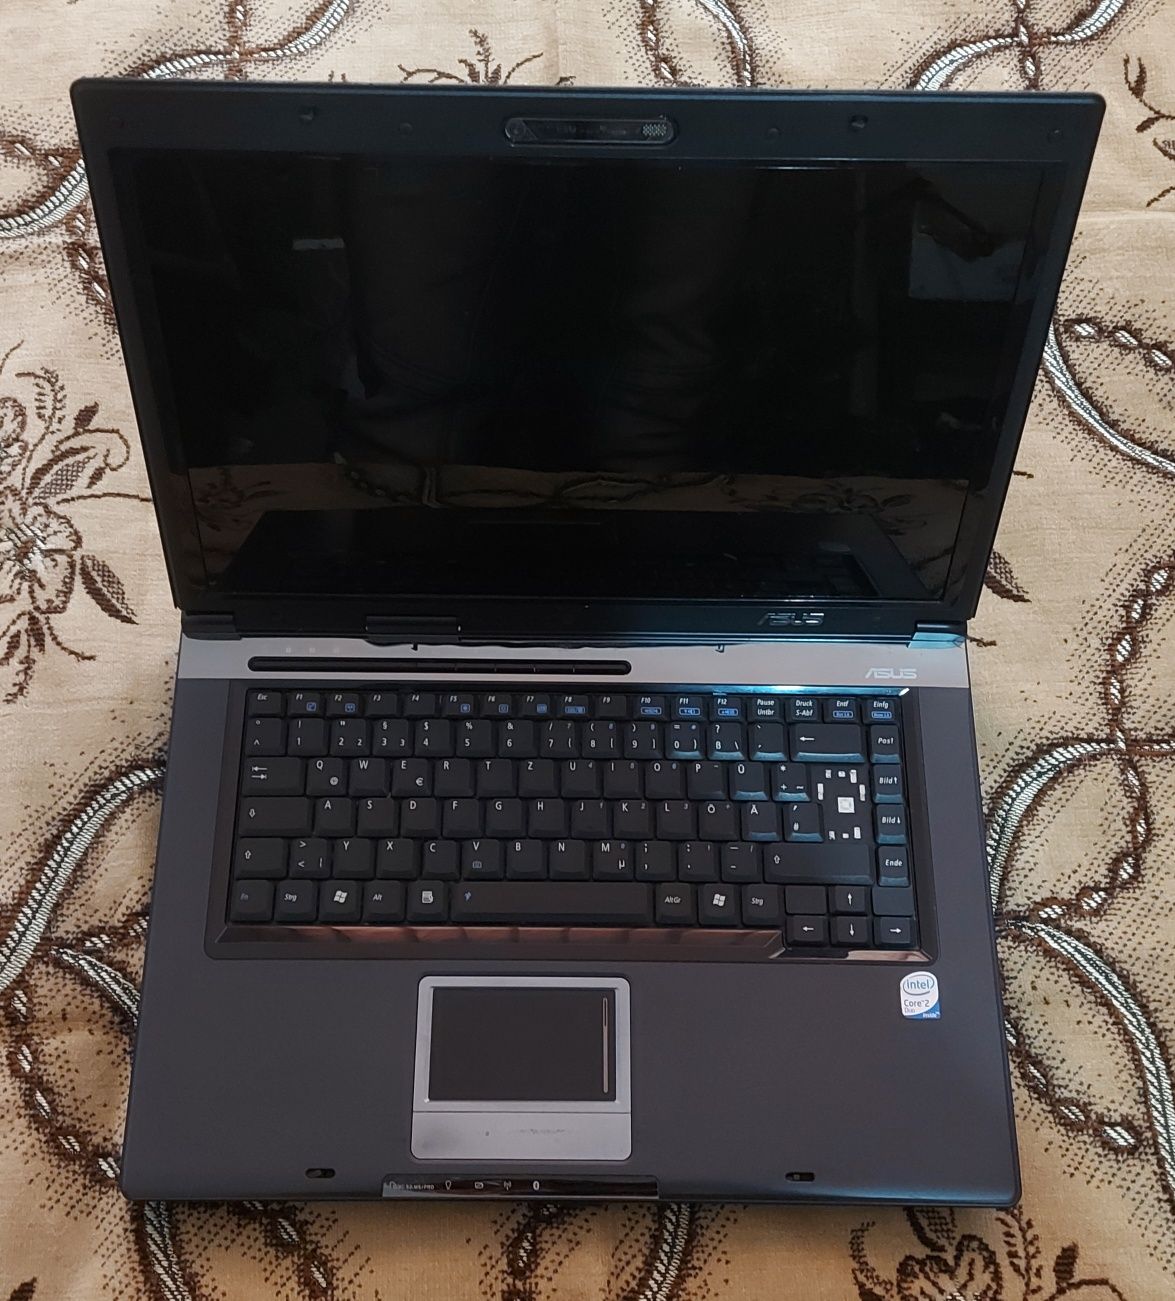 Laptop Asus PRO55S , core2duo, 4GB, 320 HDD, DVD-RW